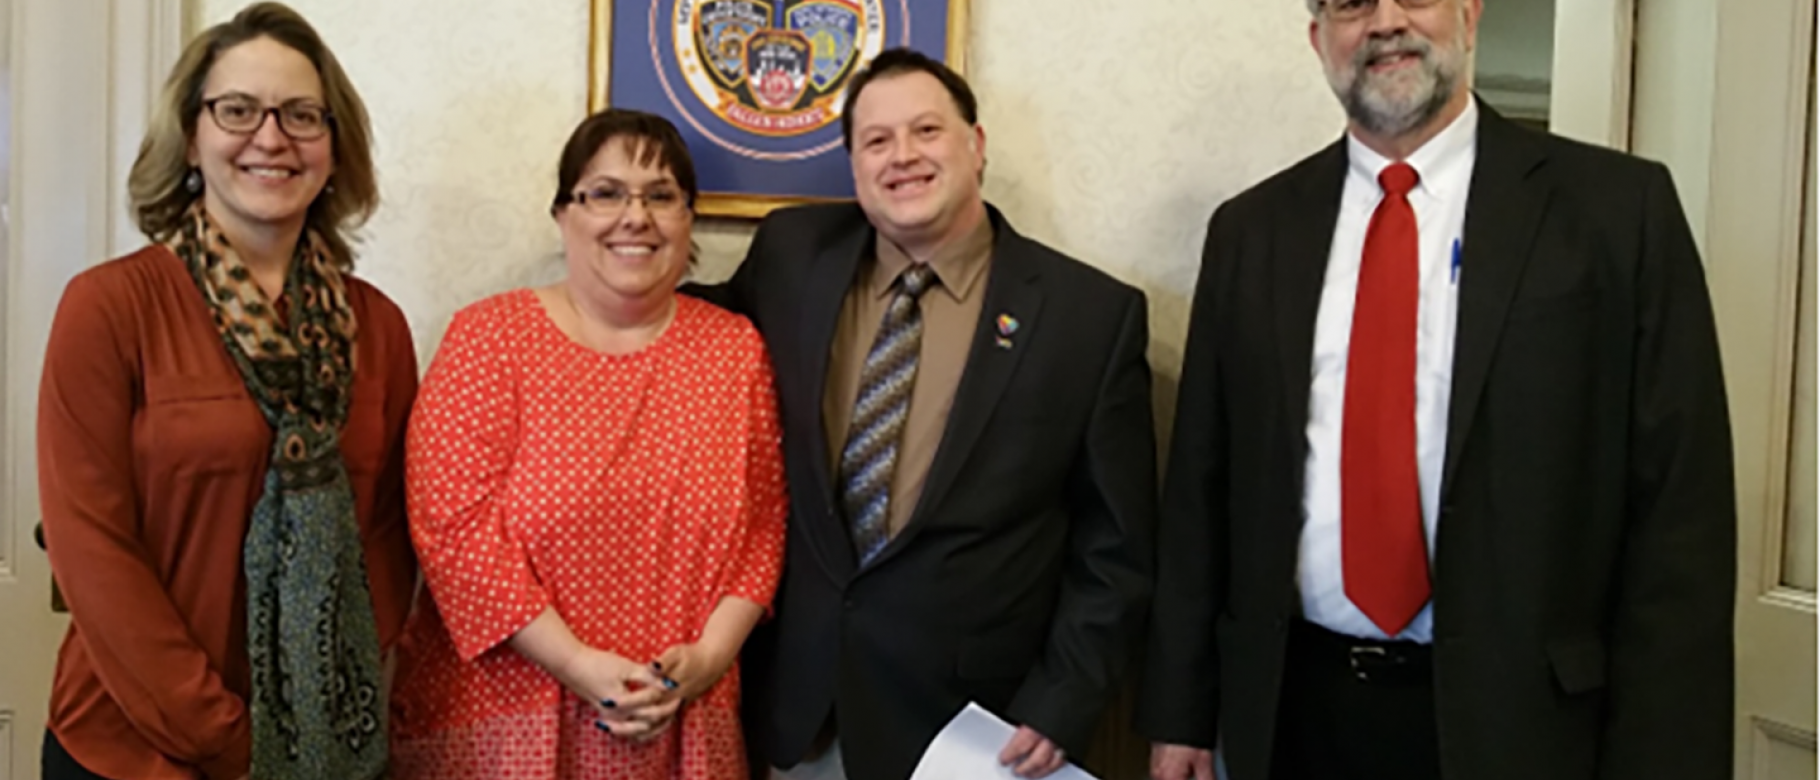 Caryn Husman, Cathy Dionne of the Autism Society of Maine, Councilor Robert Quattrone and Mayor Alan Casavant